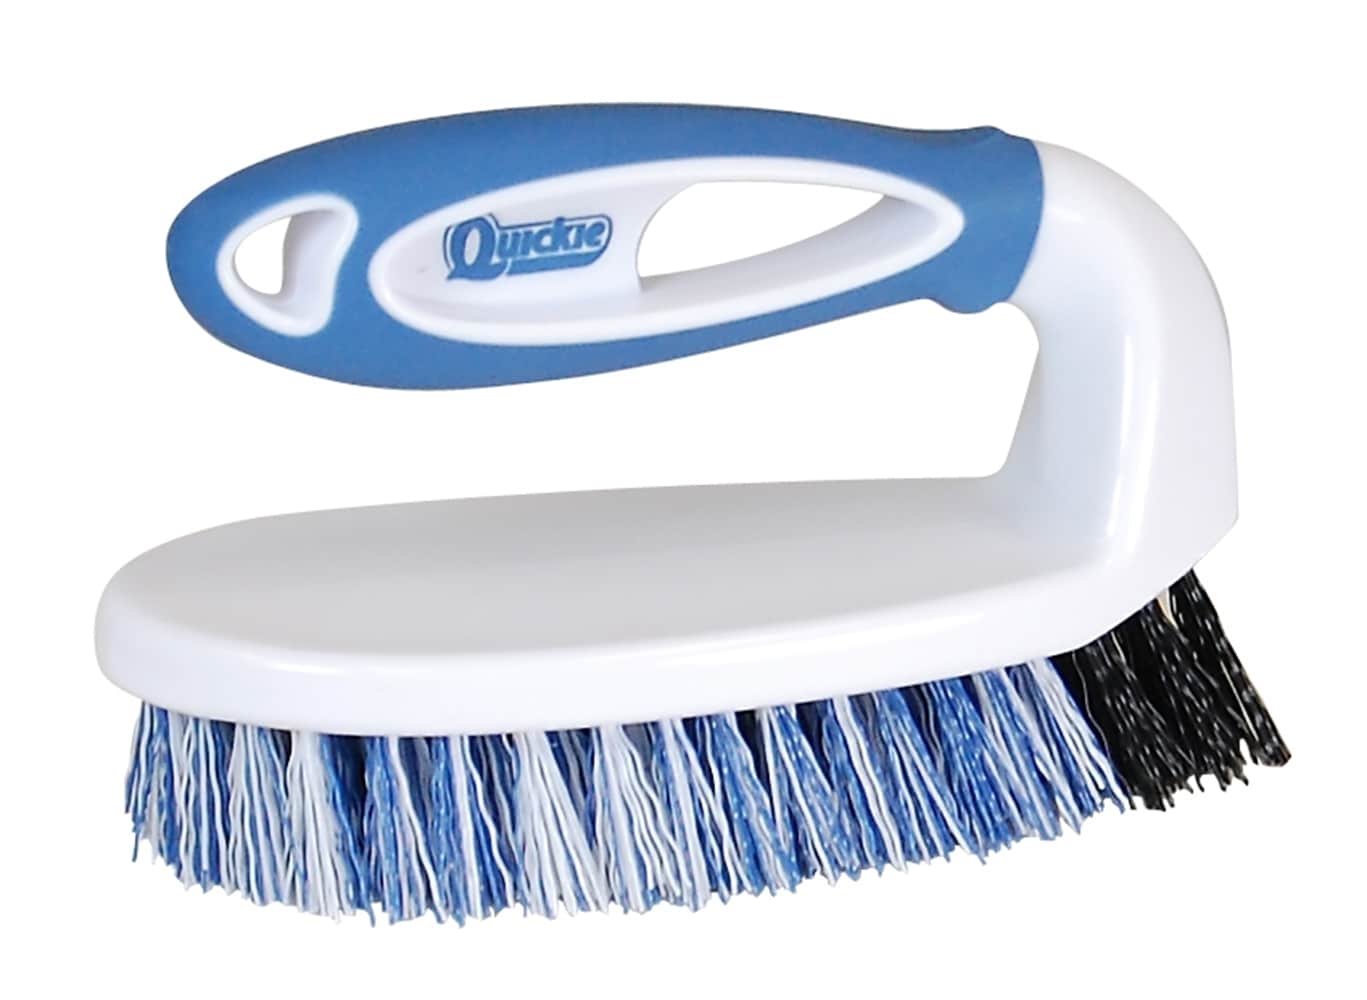 LIGHTSMAX Polypropylene Dish Brush with Soap Dispenser in the Kitchen  Brushes department at